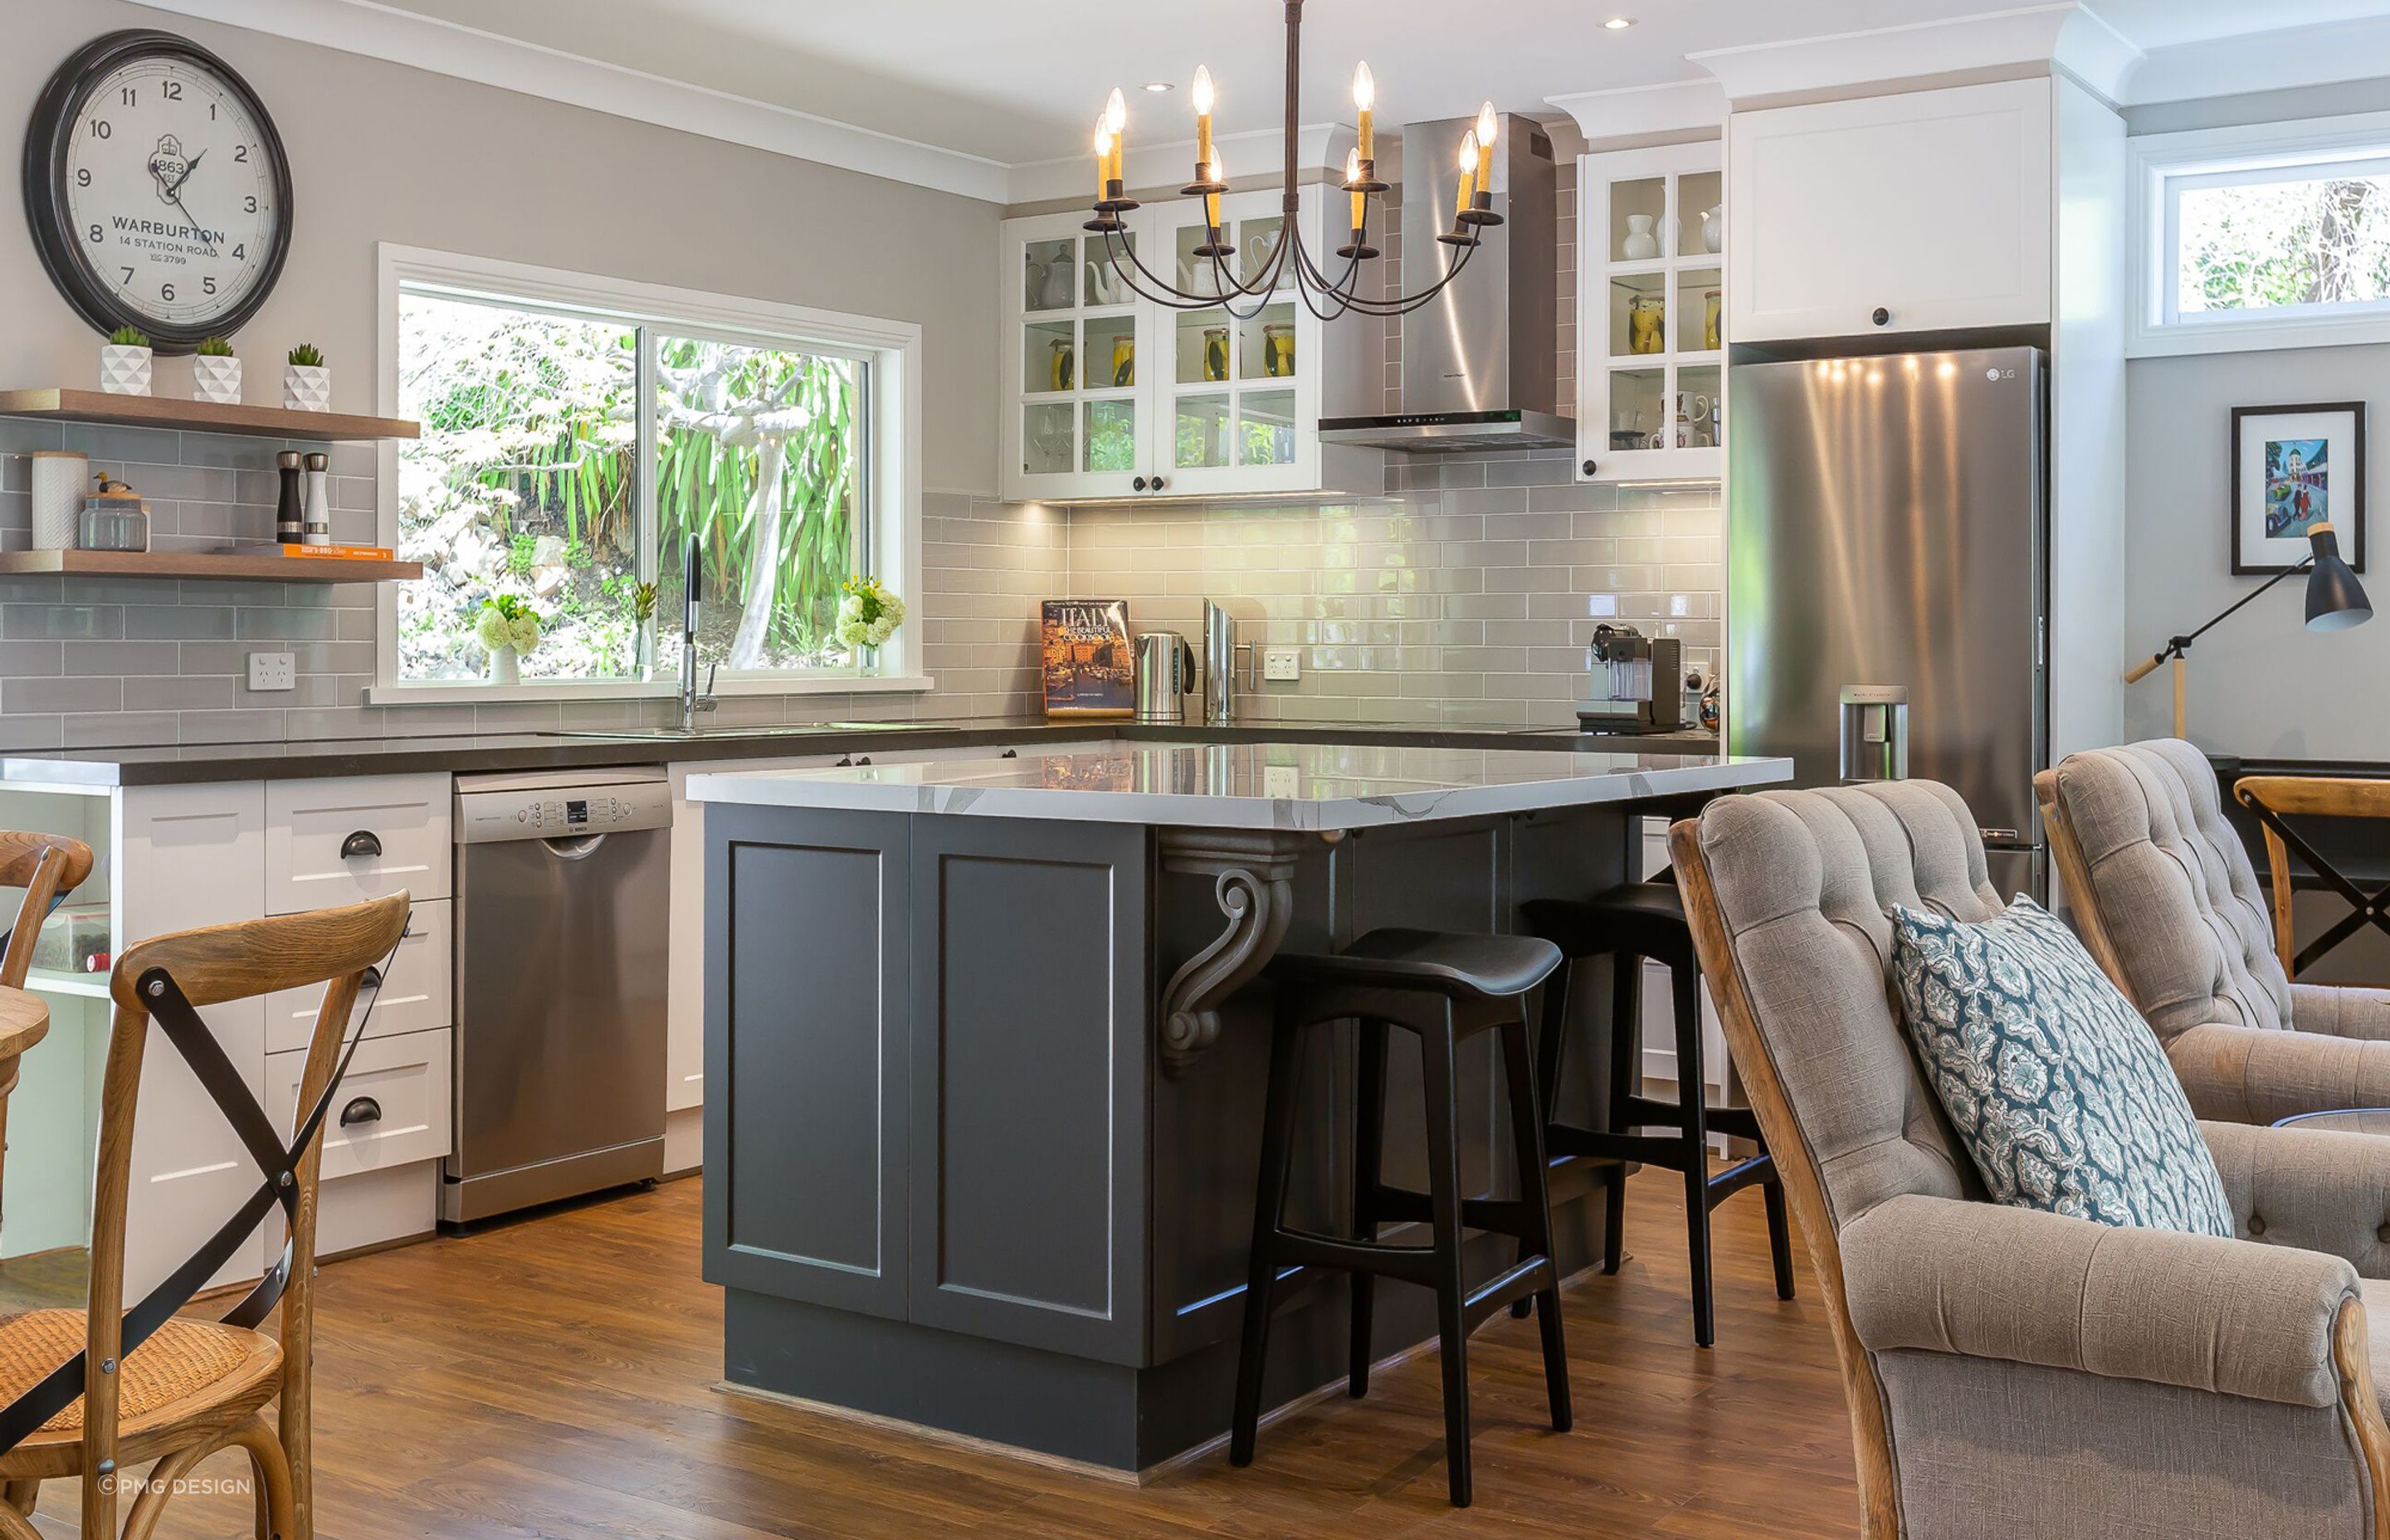 A Hamptons Style kitchen with a graceful iron chandelier.